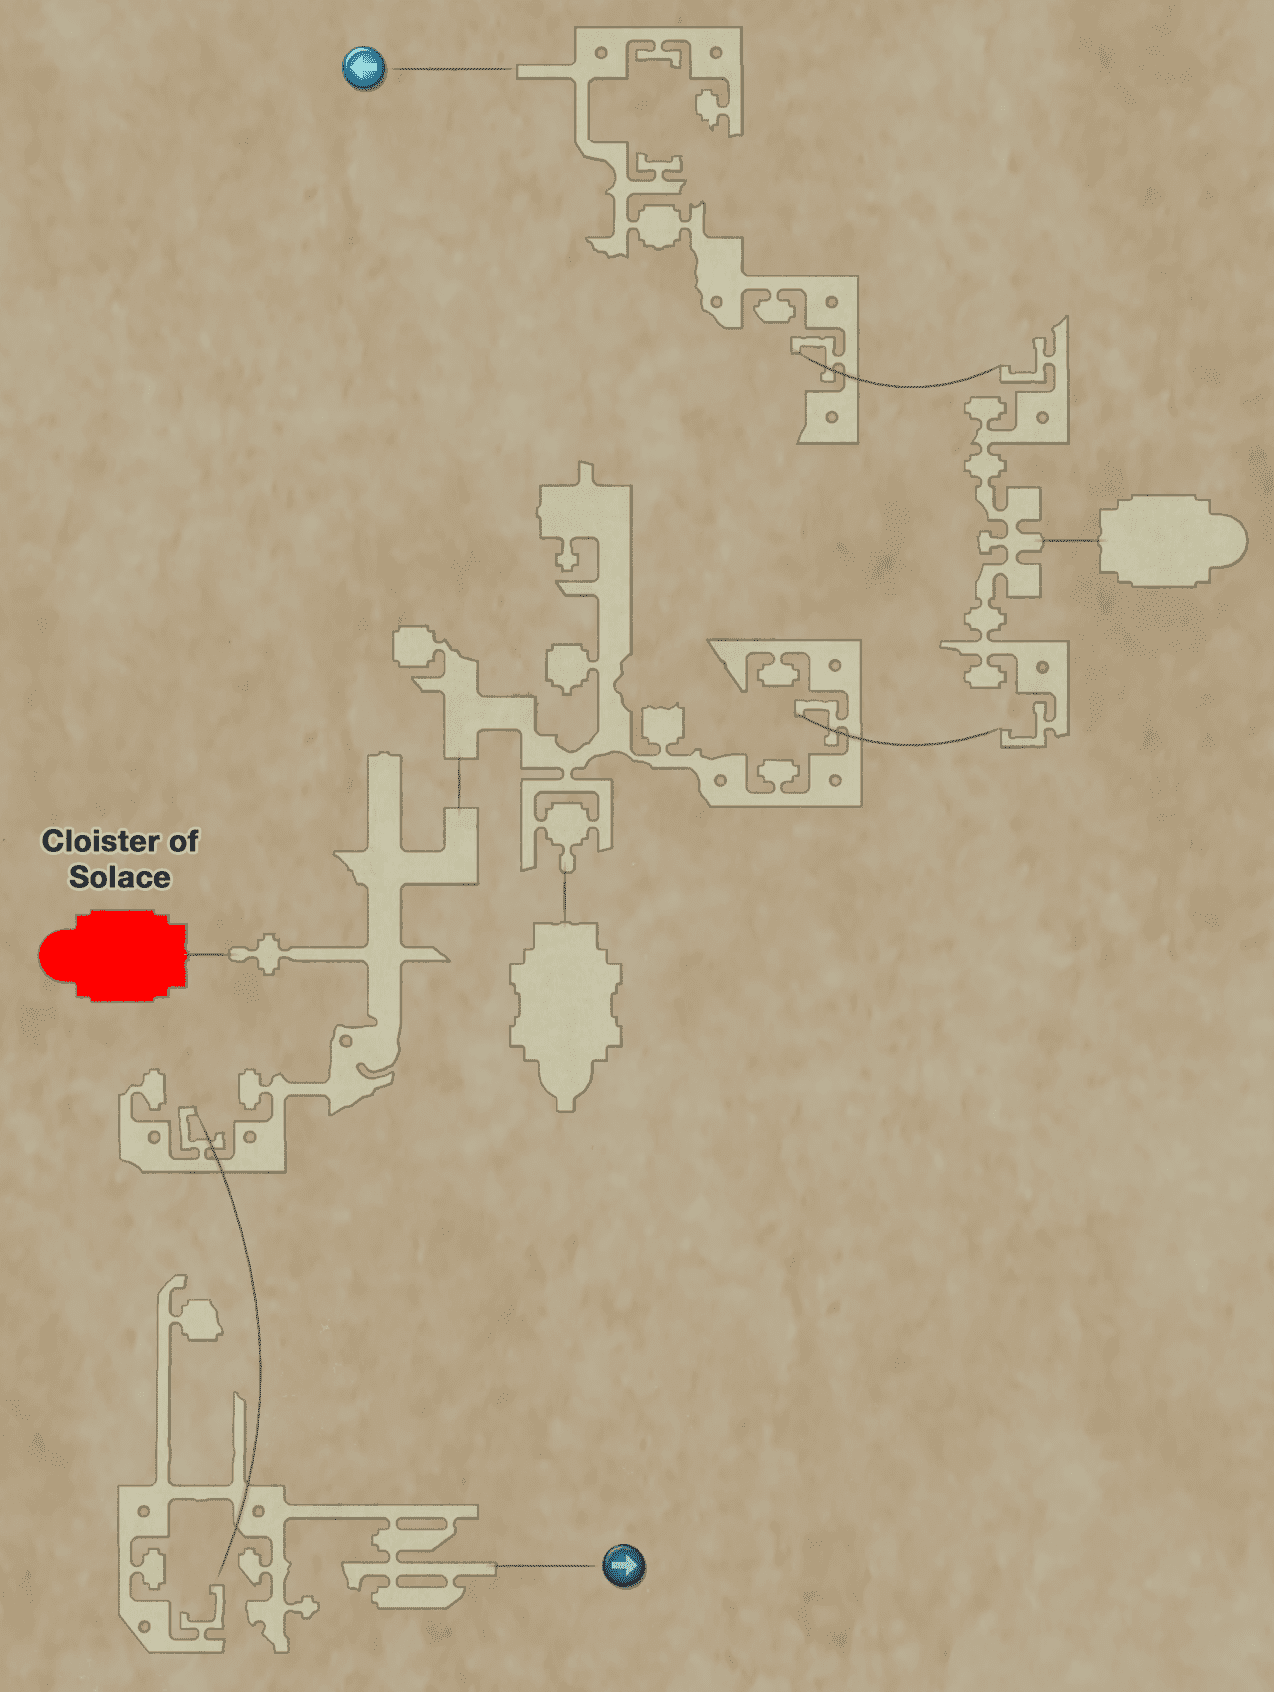 Map of the Necrohol of Nabudis with the Cloister of Solice - Humbaba Mistant location pointed out